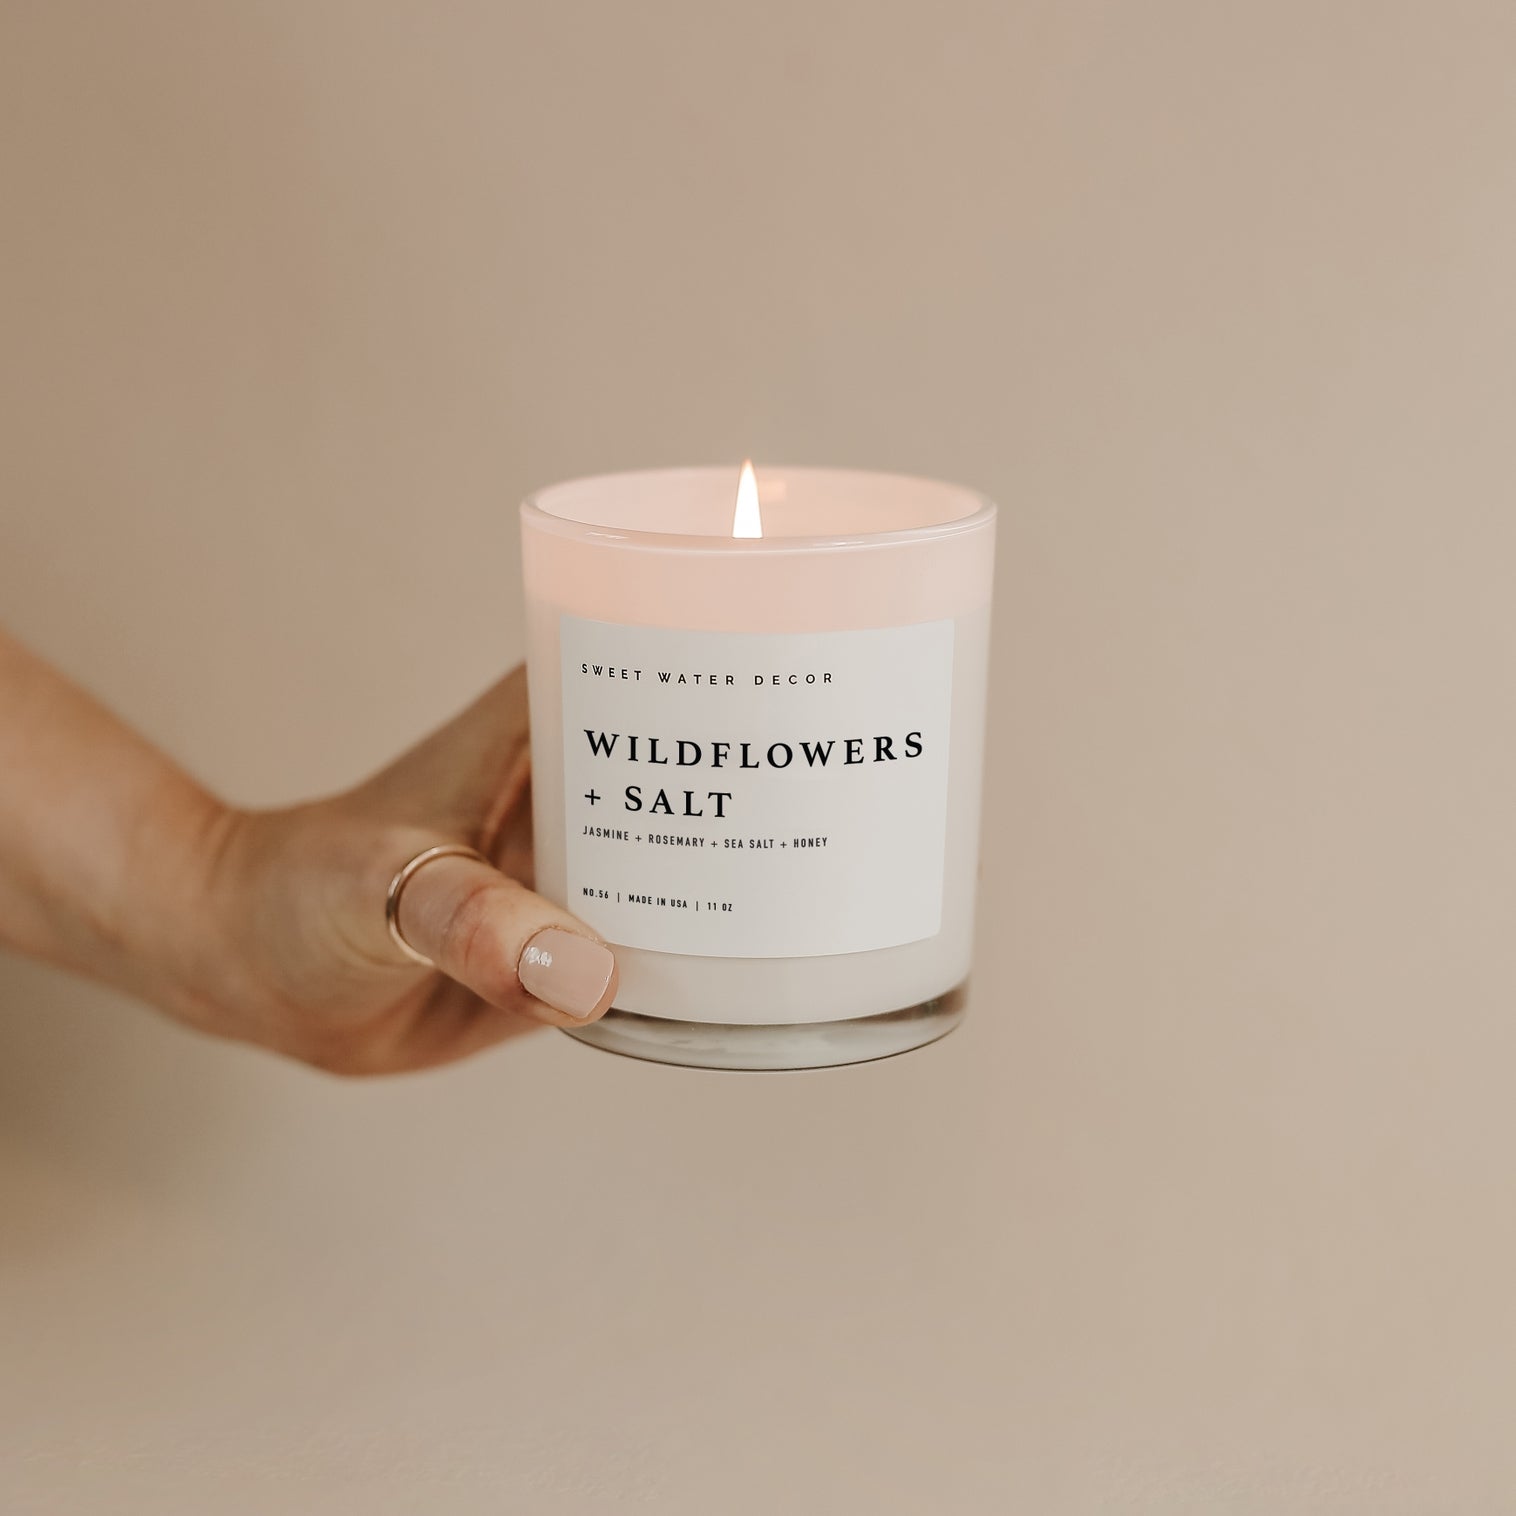 Wildflowers and Salt 11 oz Soy Candle